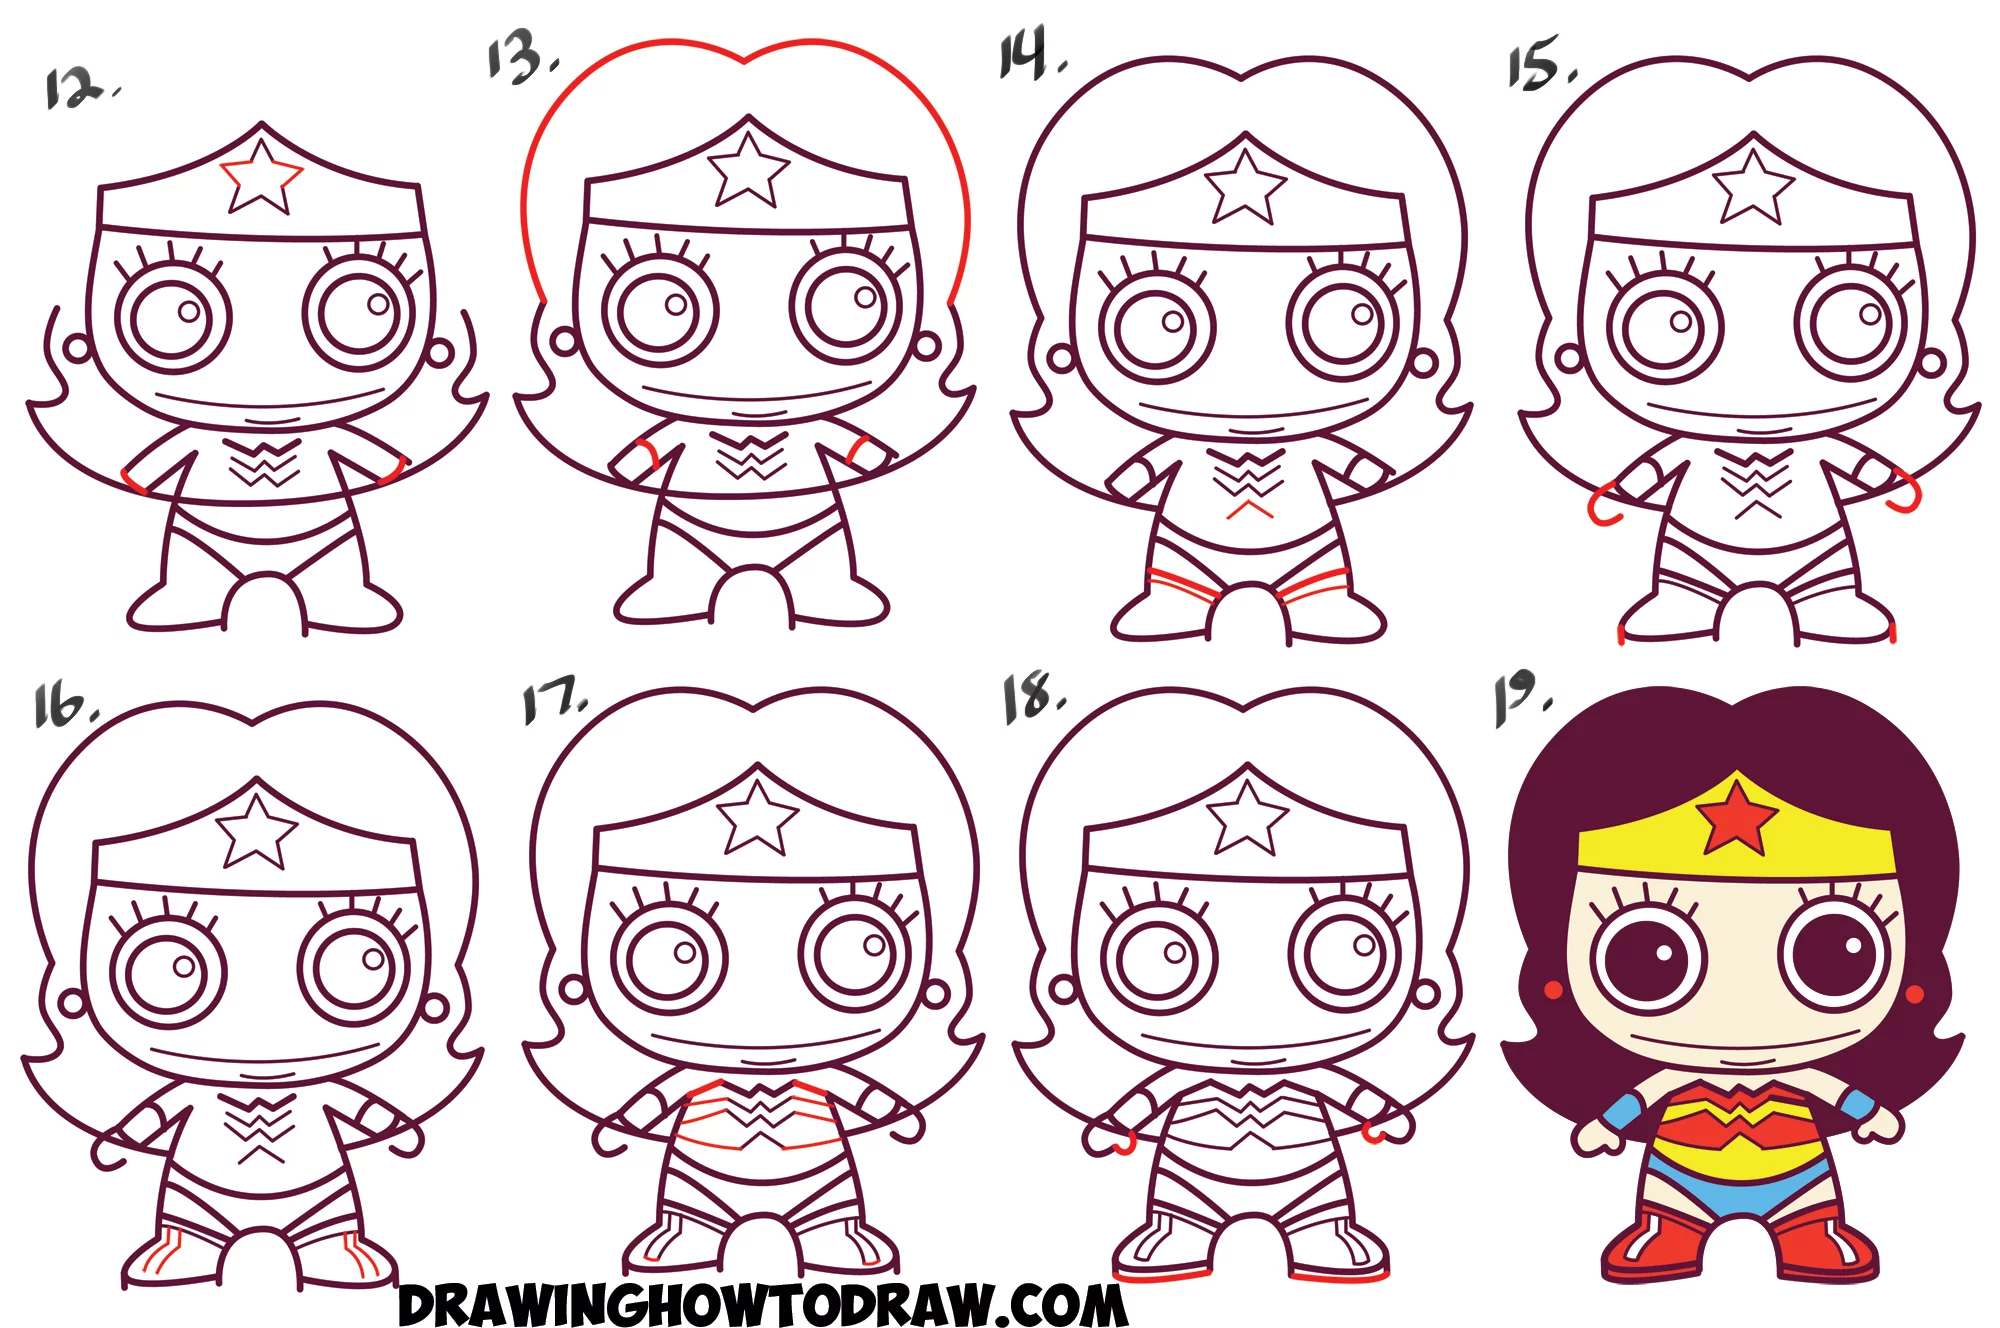 How To Draw Cute Chibi Wonder Woman From Dc Comics In Easy Step By Step Drawing Tutorial For Kids How To Draw Step By Step Drawing Tutorials